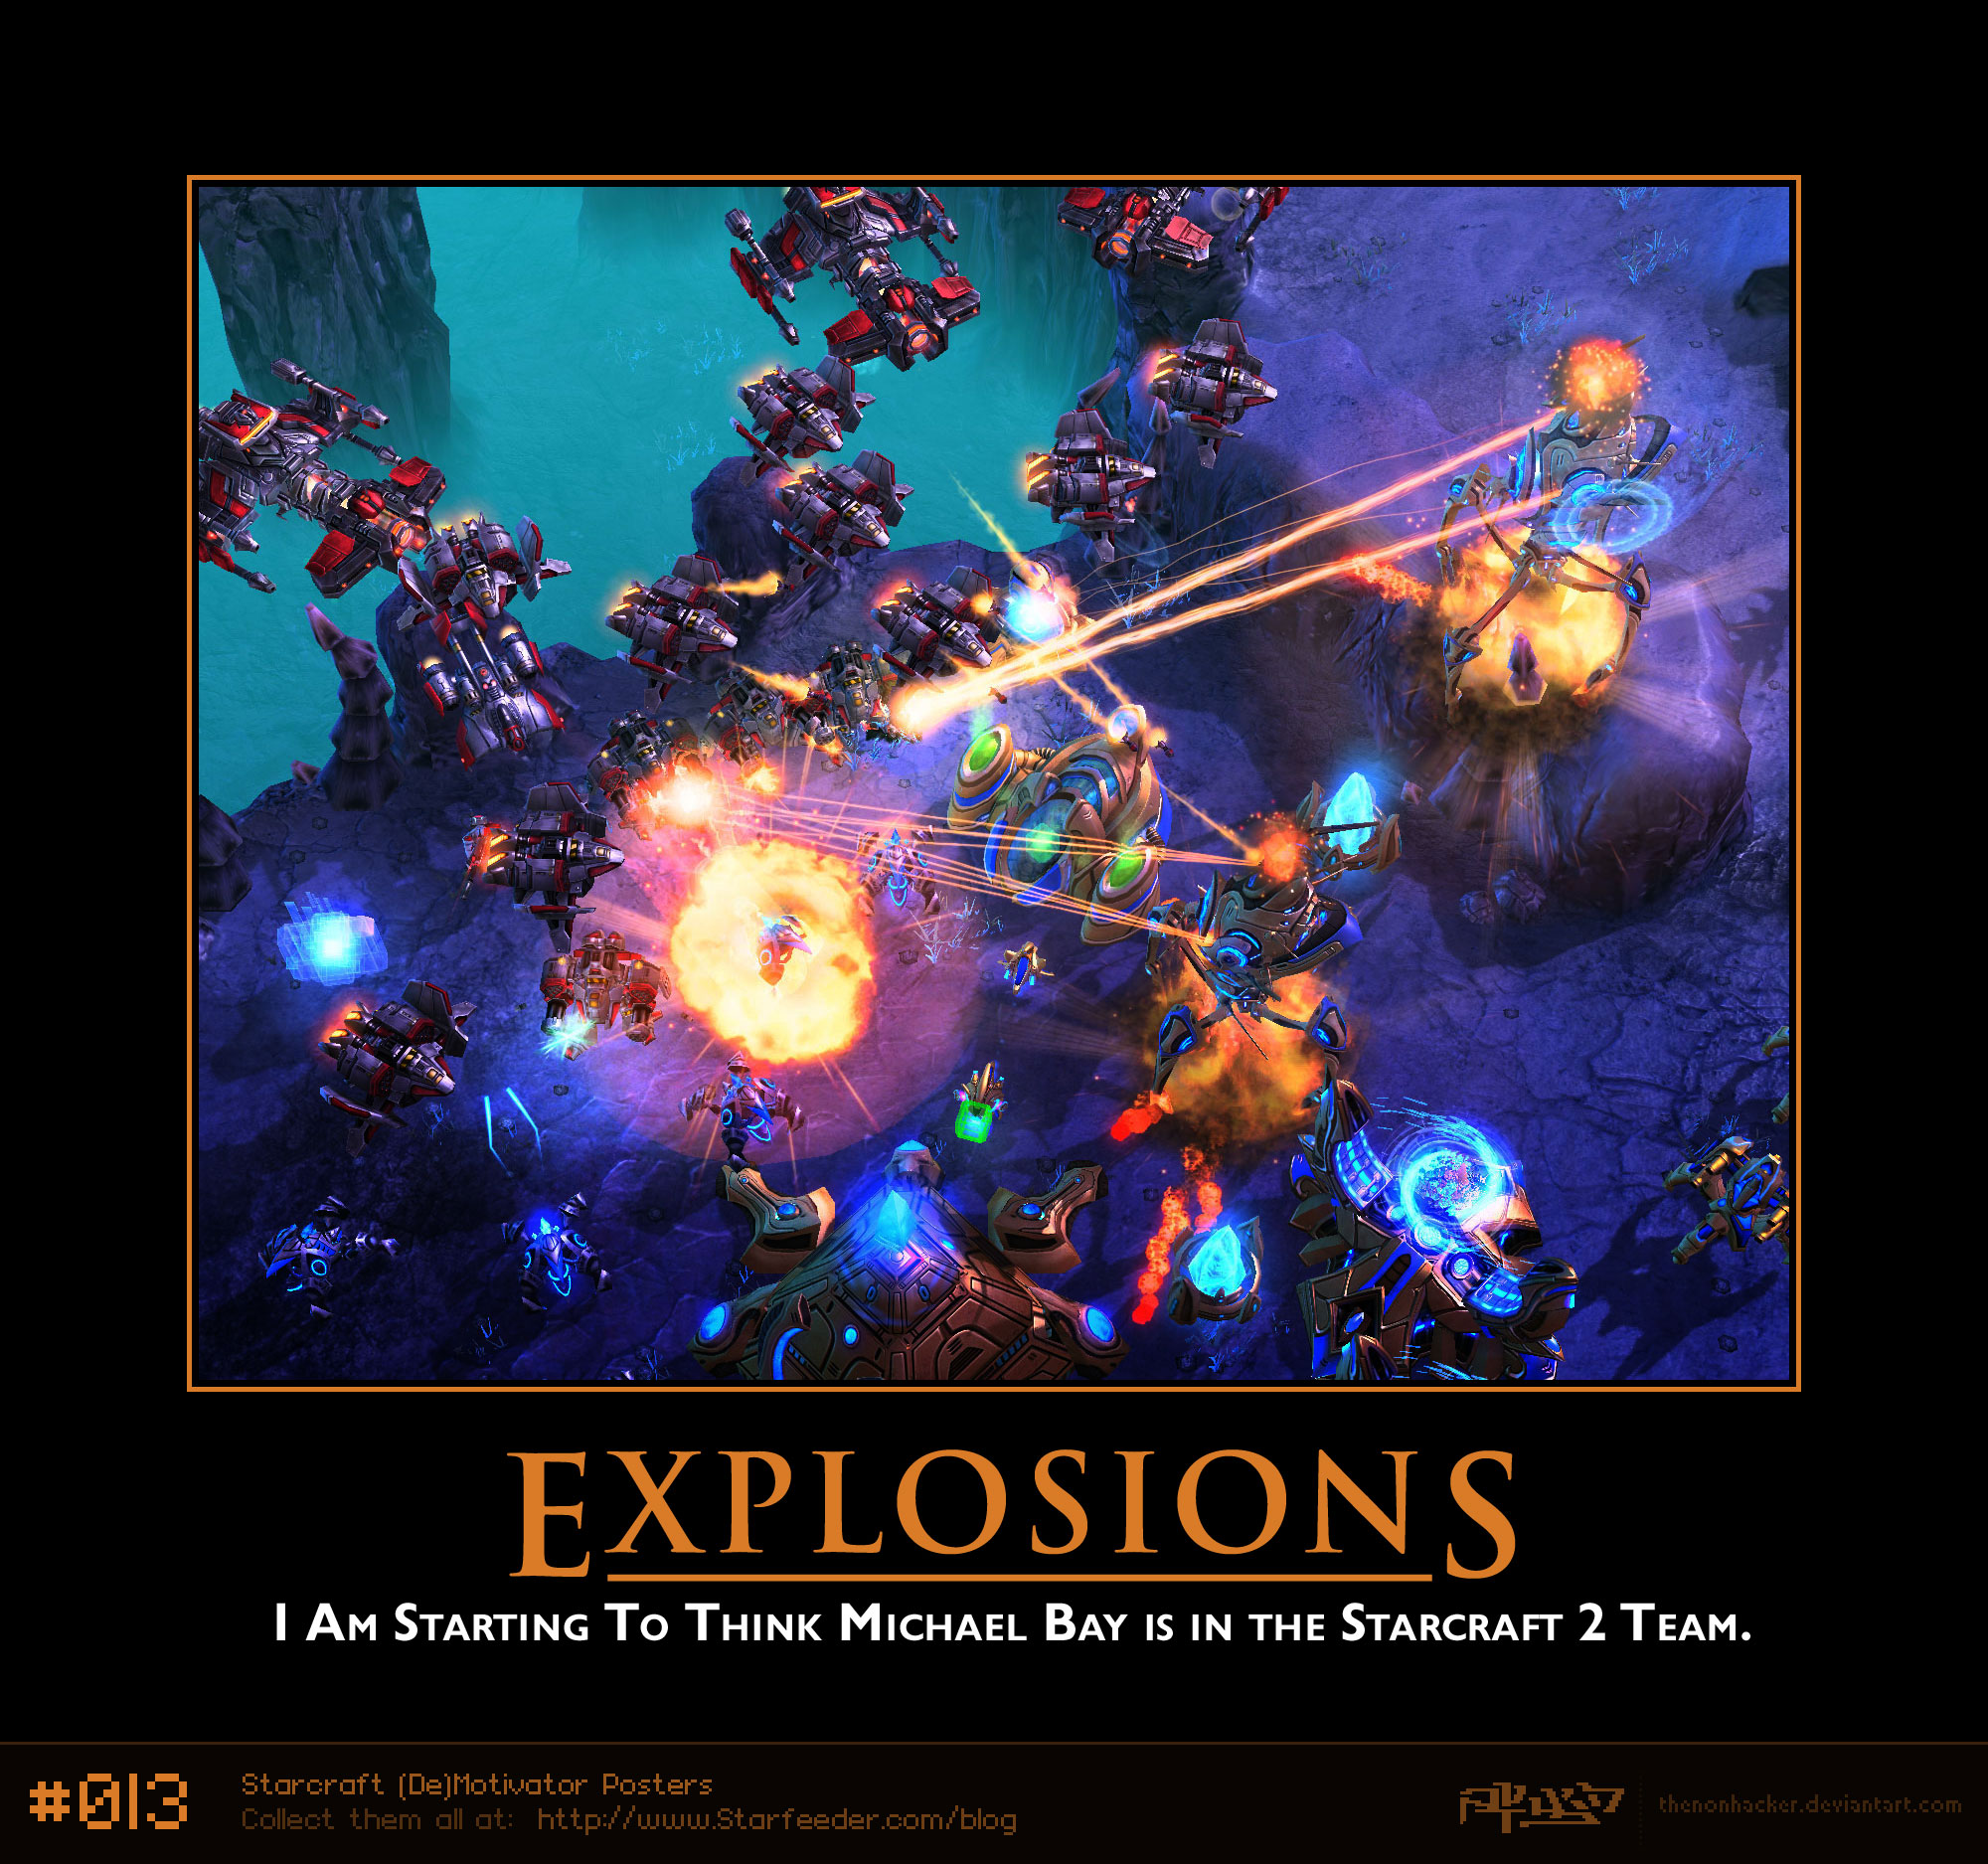 sc013 Explosions Hollywood by thenonhacker on DeviantArt